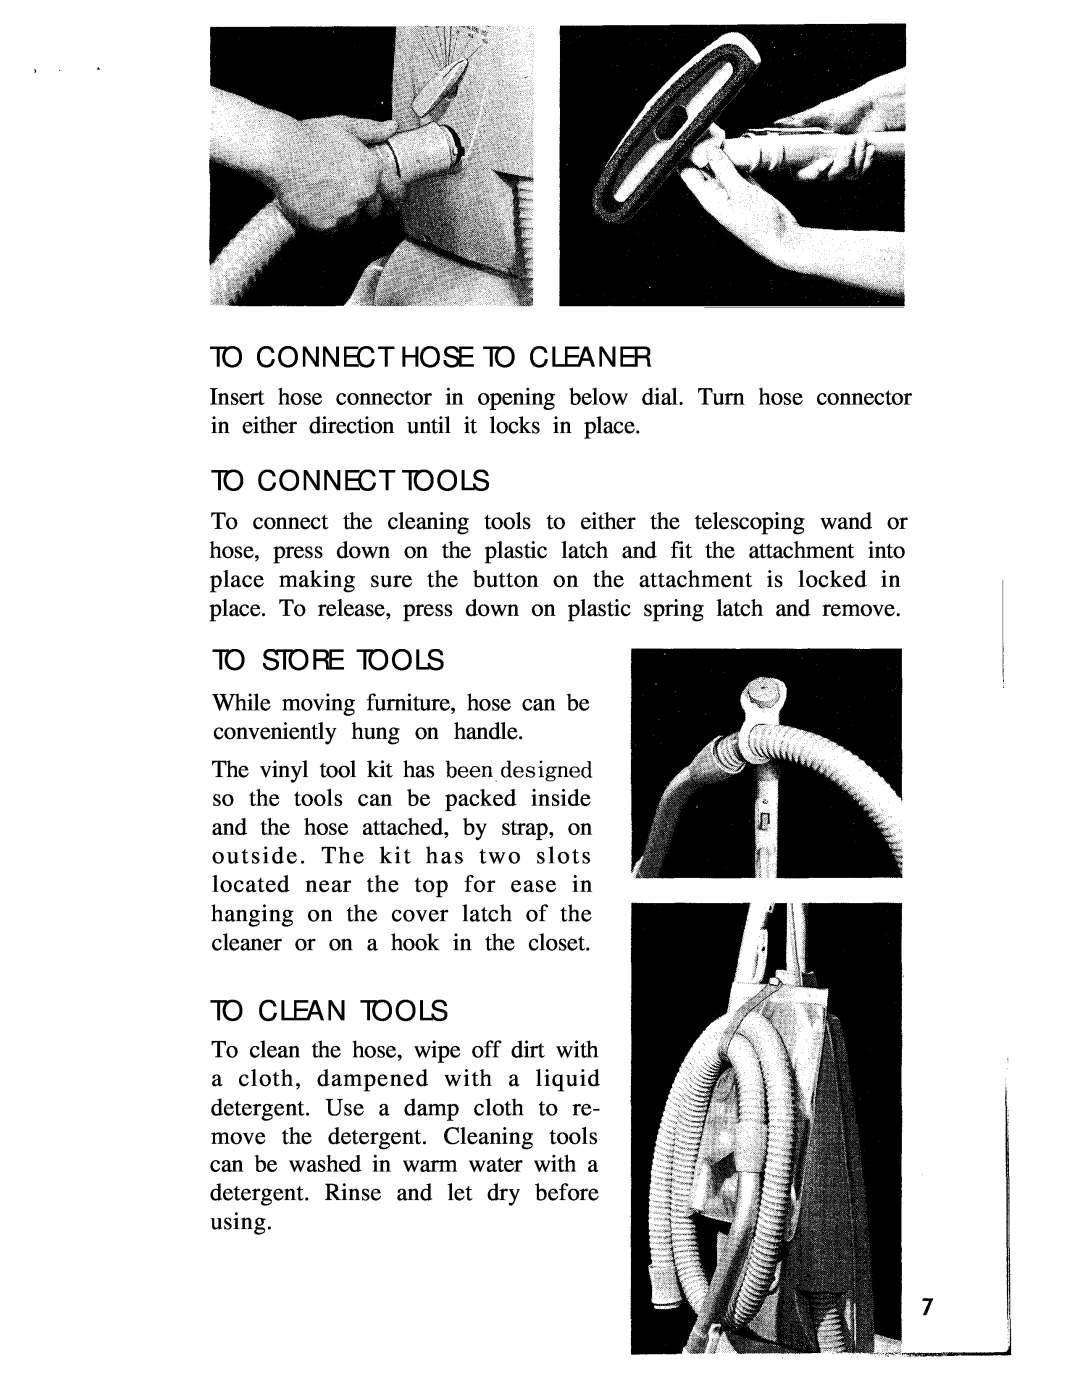 Hoover 1100 manual To Connect Hose To Cleaner, To Connect Tools, To Store Tools, To Clean Tools 